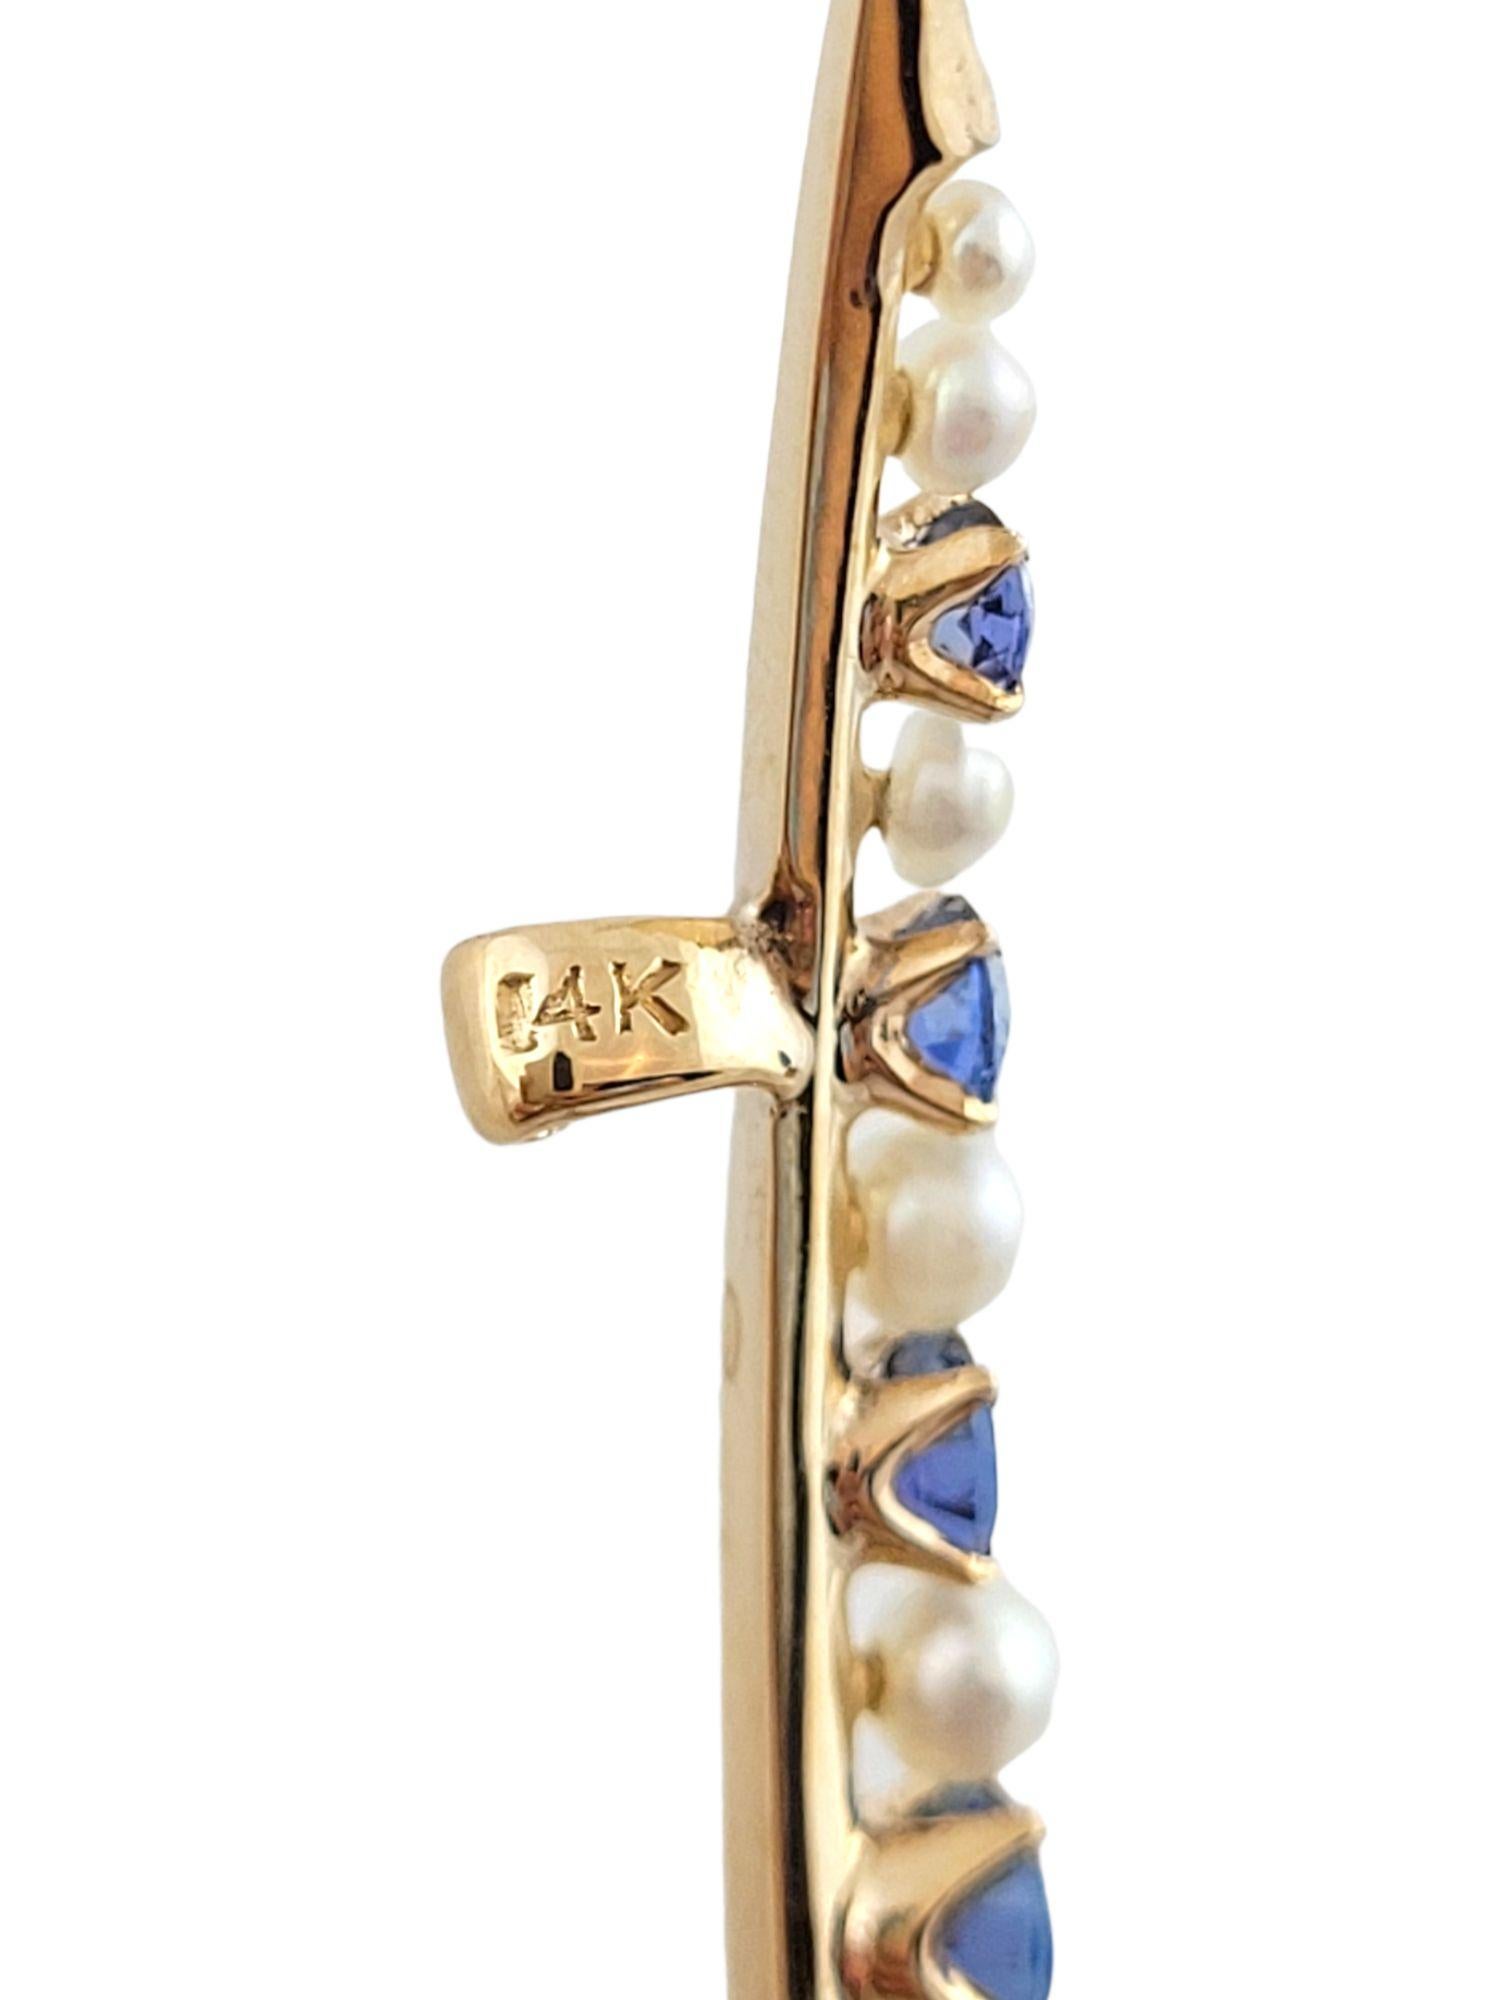 14K Yellow Gold Sapphire and Pearl Crescent Moon Brooch #14776 For Sale 1